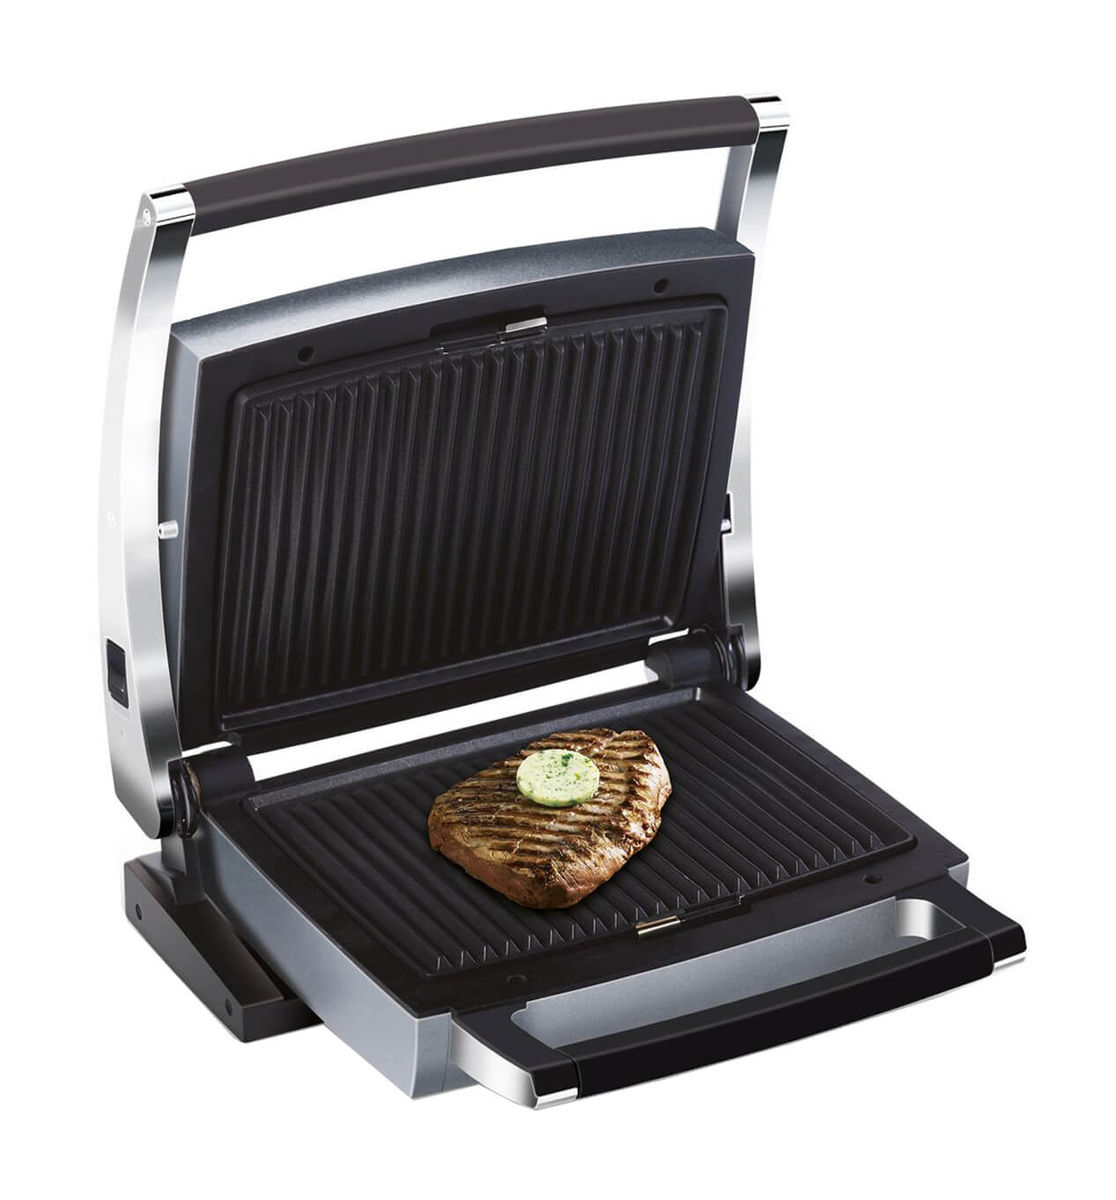 Image of Fritel CW 2428 Combi Grill bei nettoshop.ch